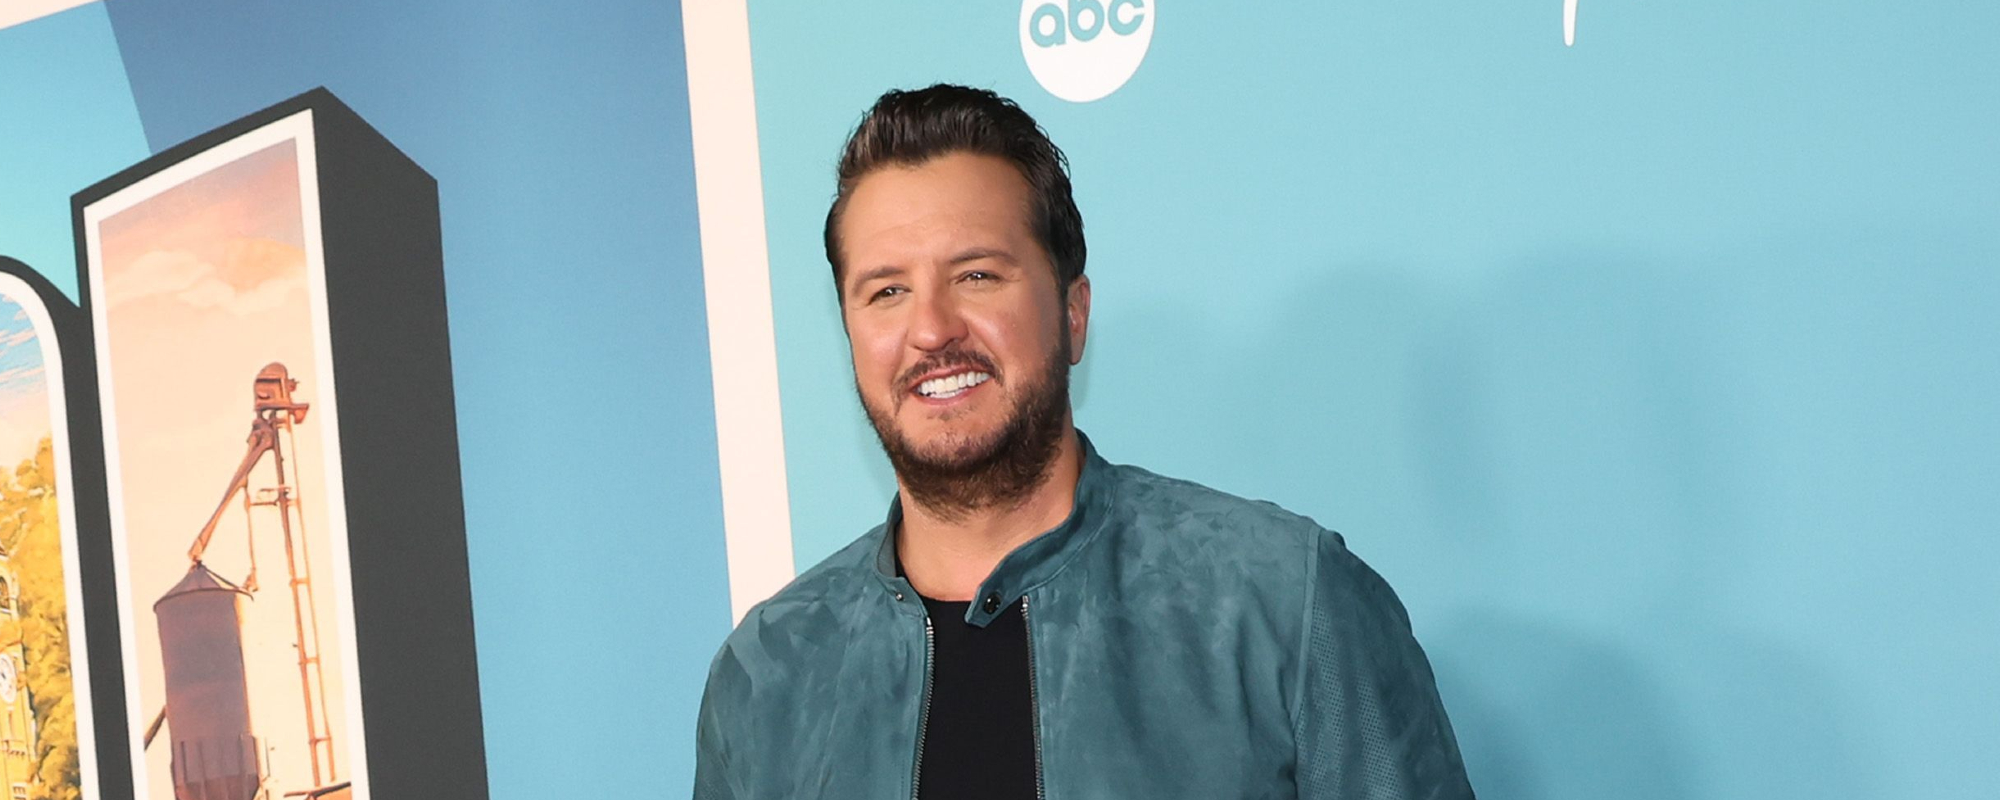 ‘American Idol’ Star Luke Bryan Says Fans Are Wrong About Why He Keeps Falling on Stage